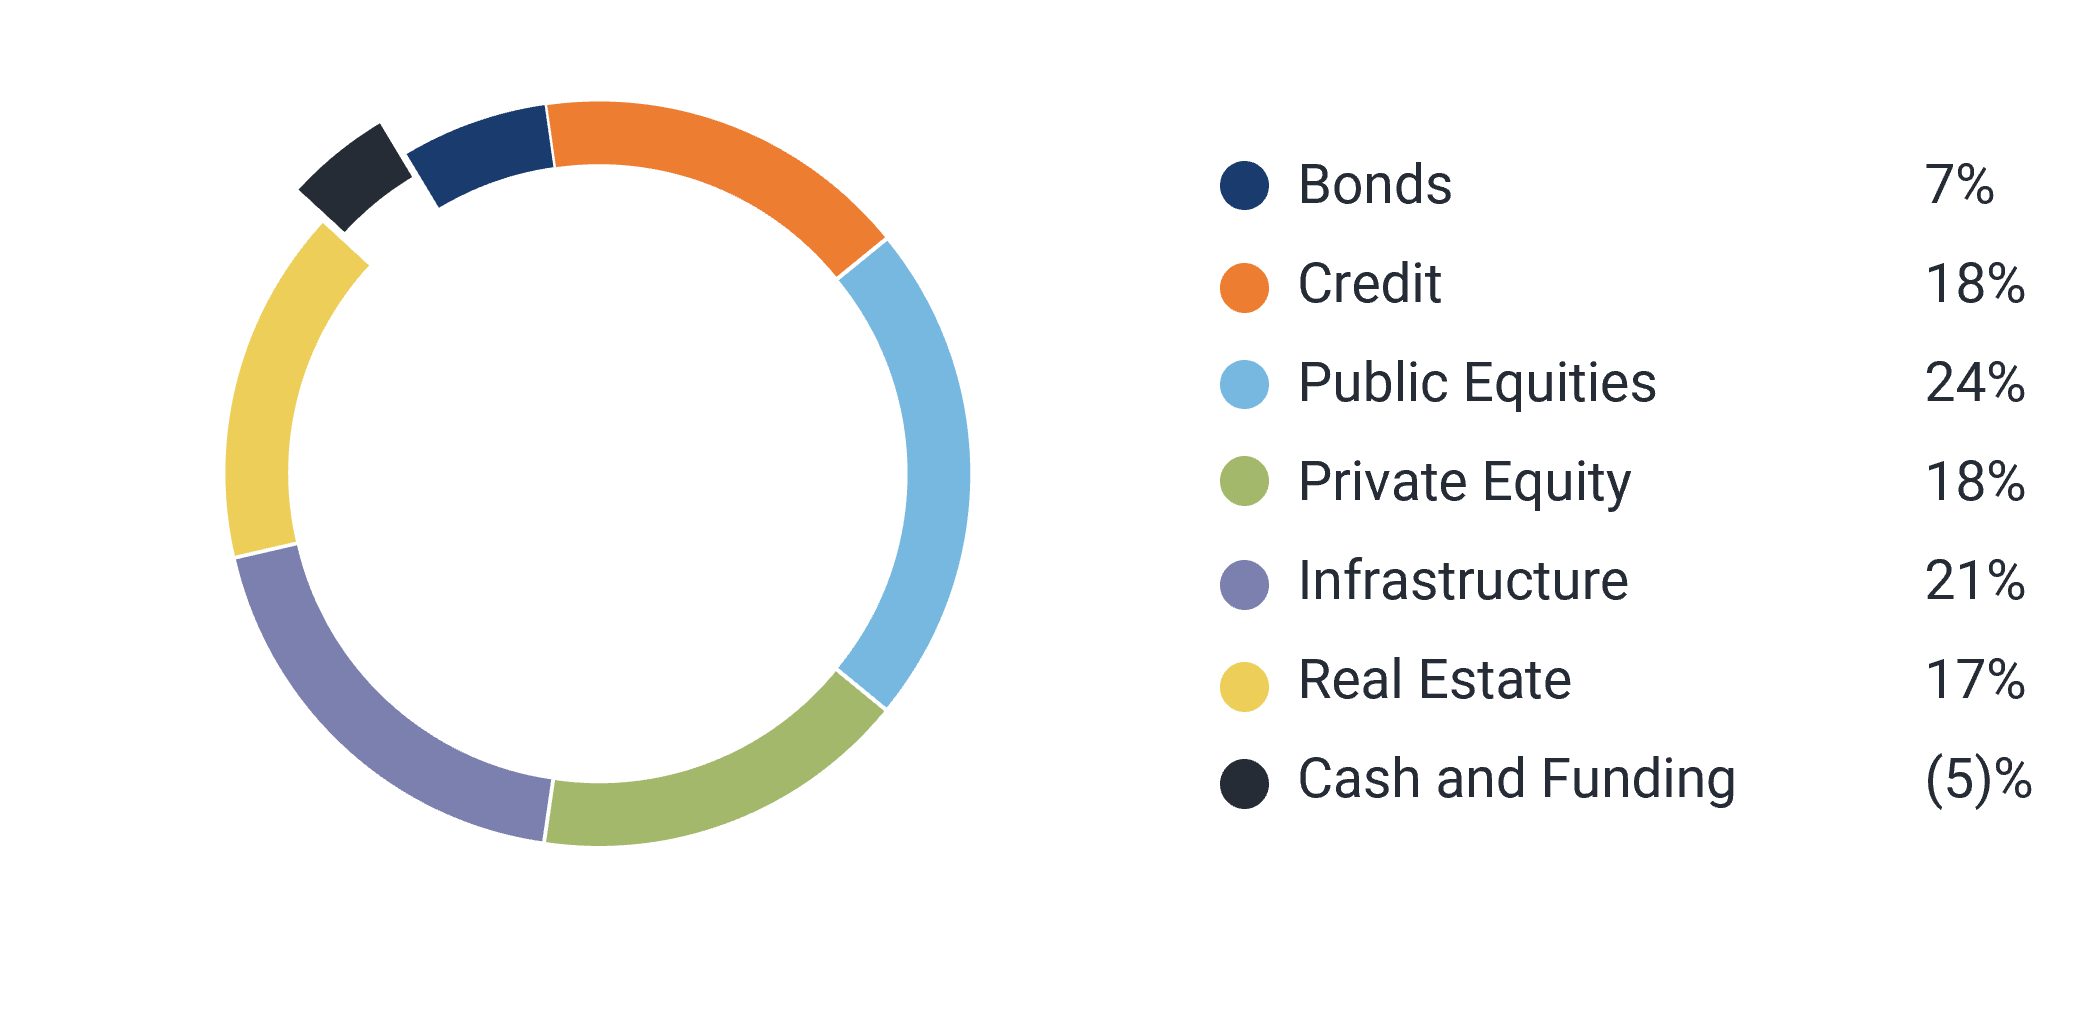 Our asset mix -  7% Bonds, 18% Credit, 24% Public Equity, 18% Private Equity, 21% Infrastructure, 17% Real Estate, -5 Cash and Funding